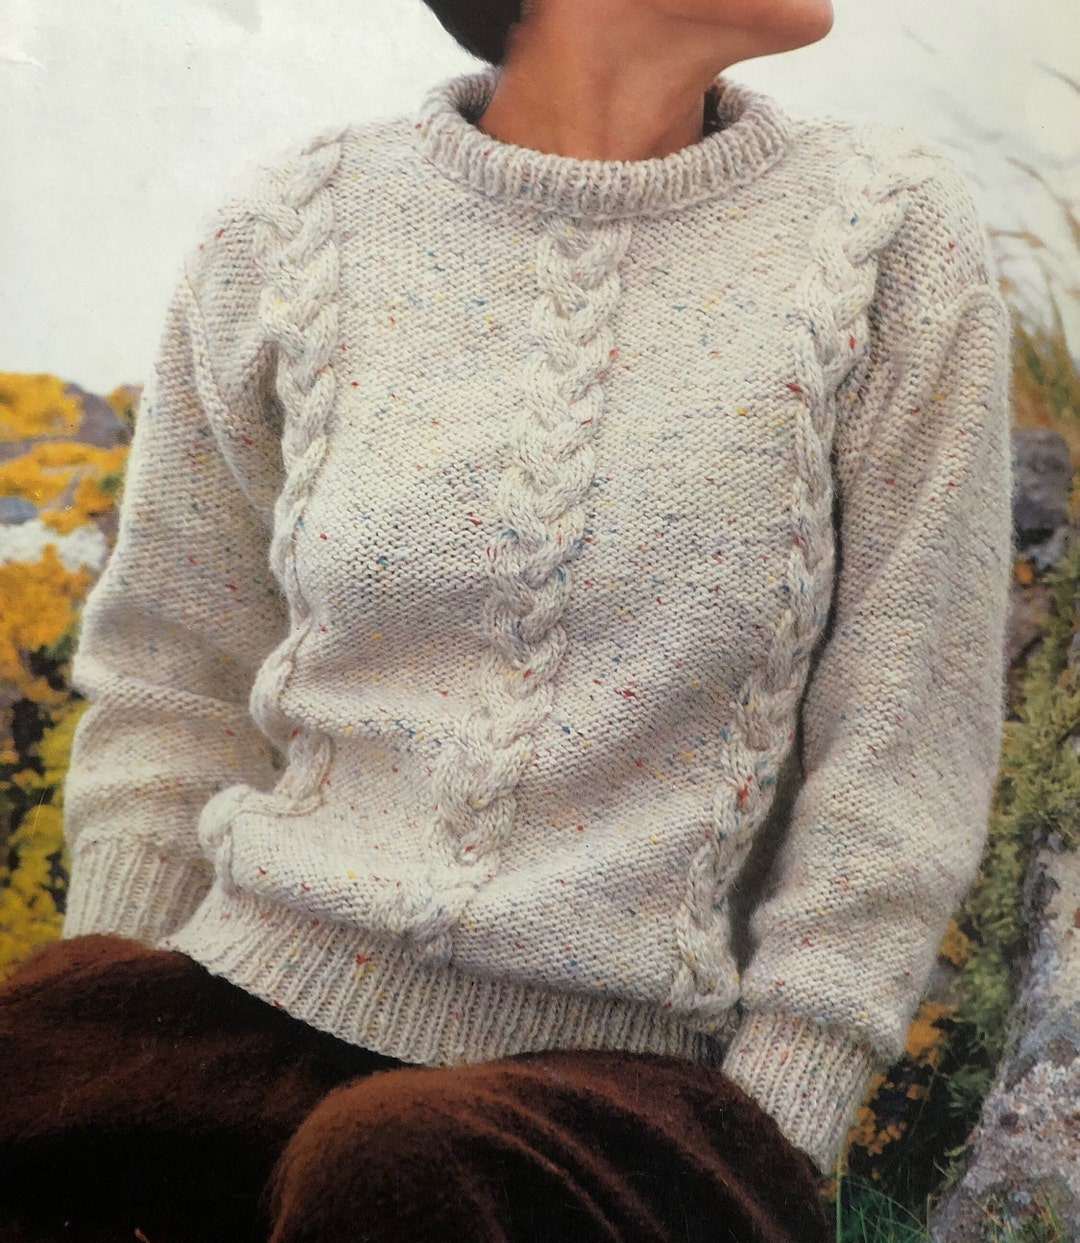 Vintage Cable Sweater Knitting Pattern in 7 Sizes PDF Pattern - Etsy